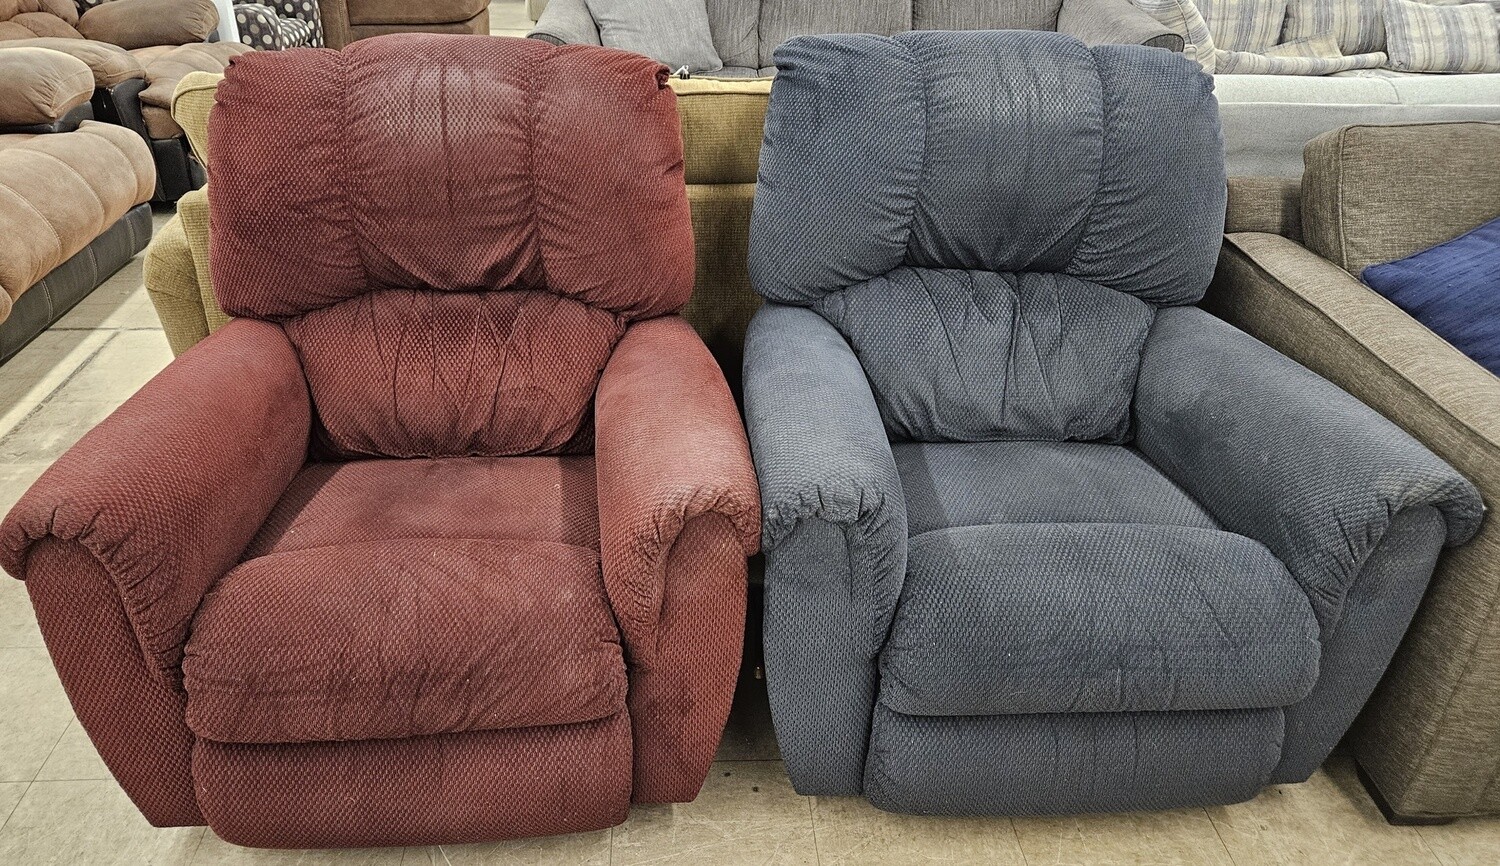 His & Hers La-Z-Boy Recliner Chairs